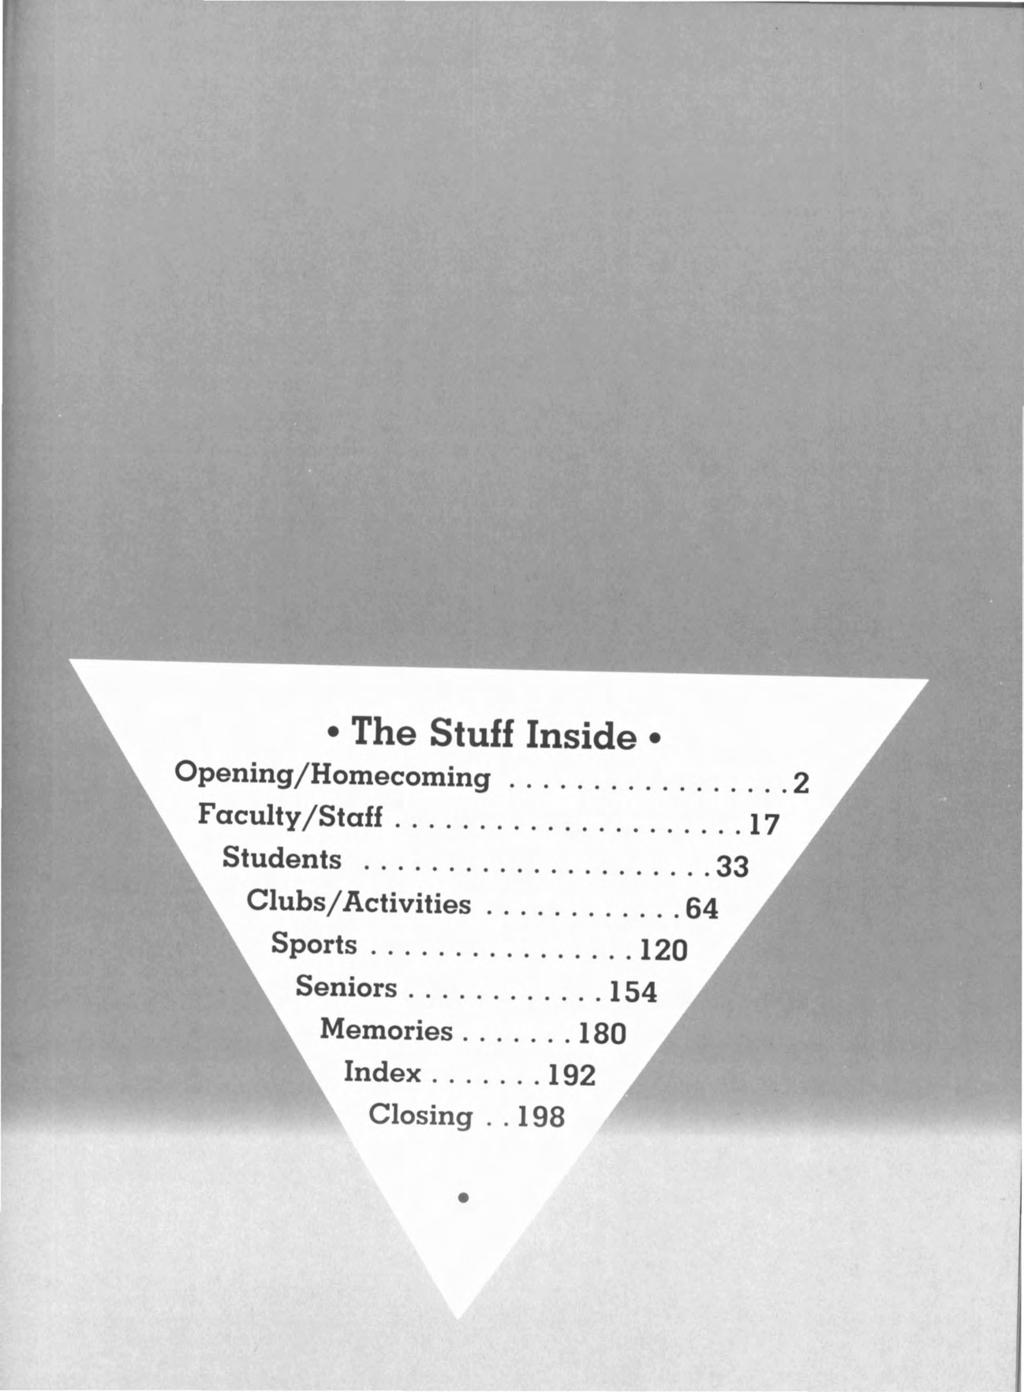 The Stuff Inside Opening/Homecoming 2 Faculty/Staff 17 Students 33